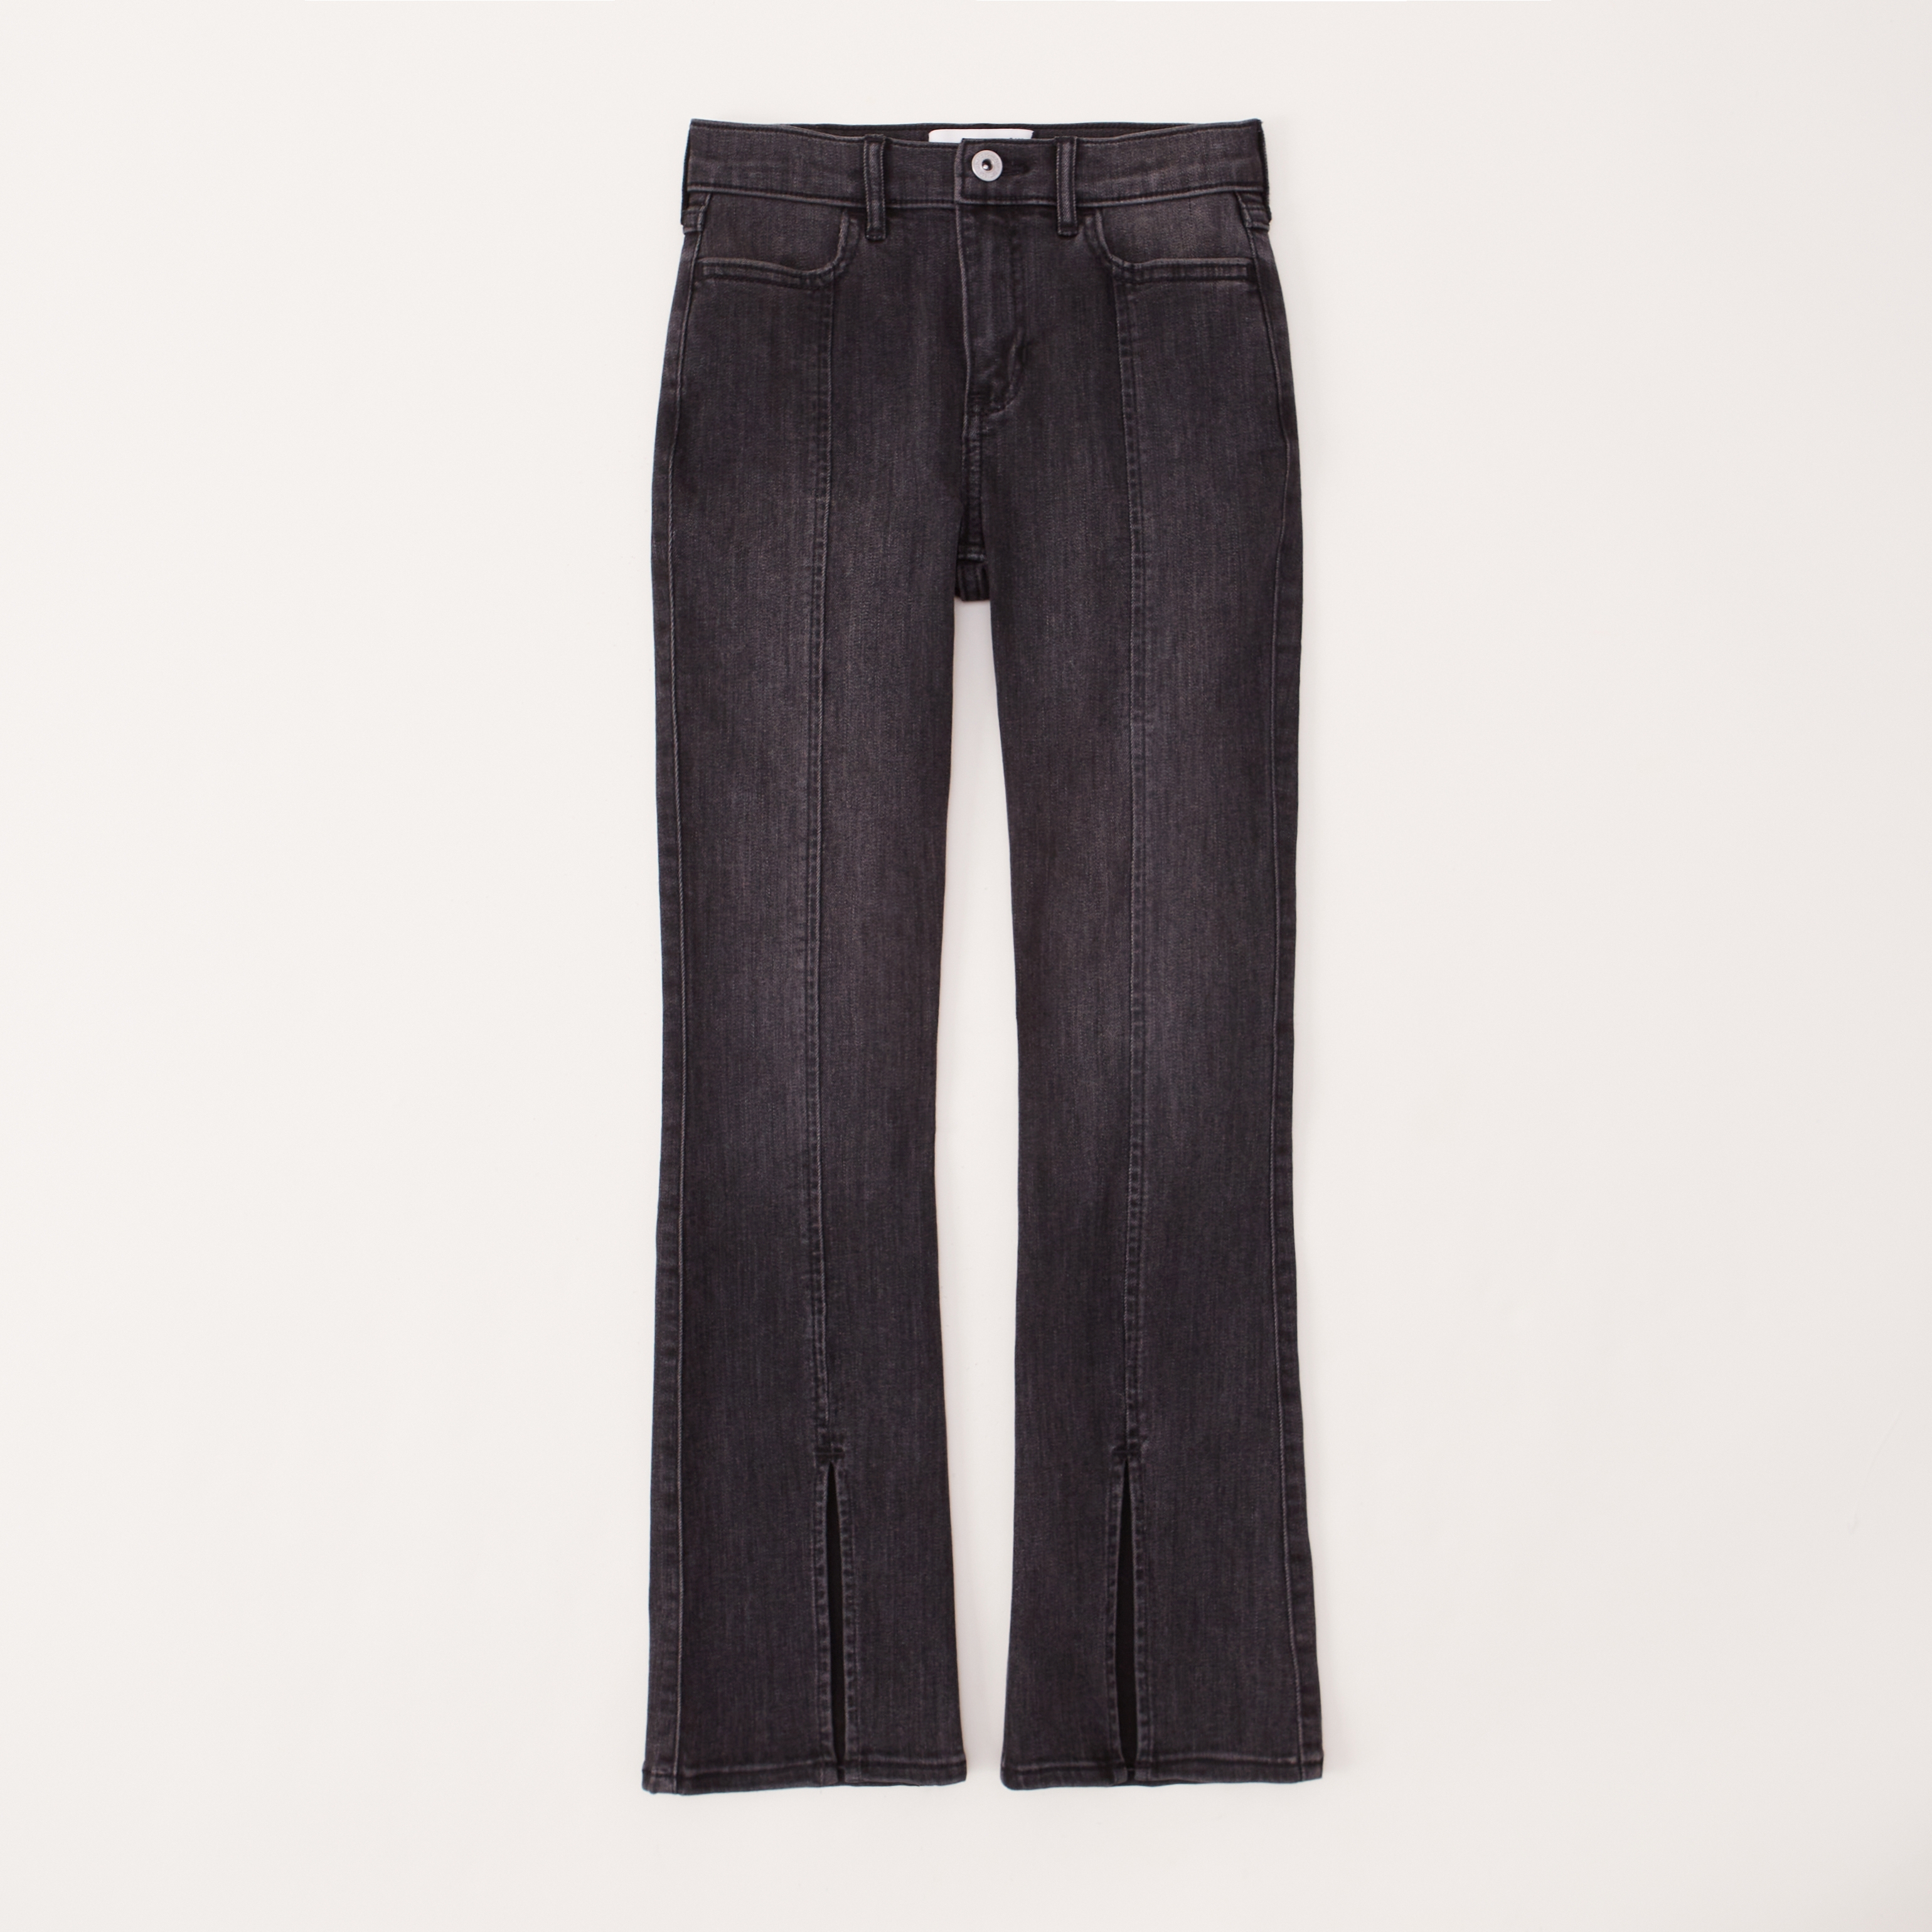 girls high rise flare jeans | girls bottoms | Abercrombie.com